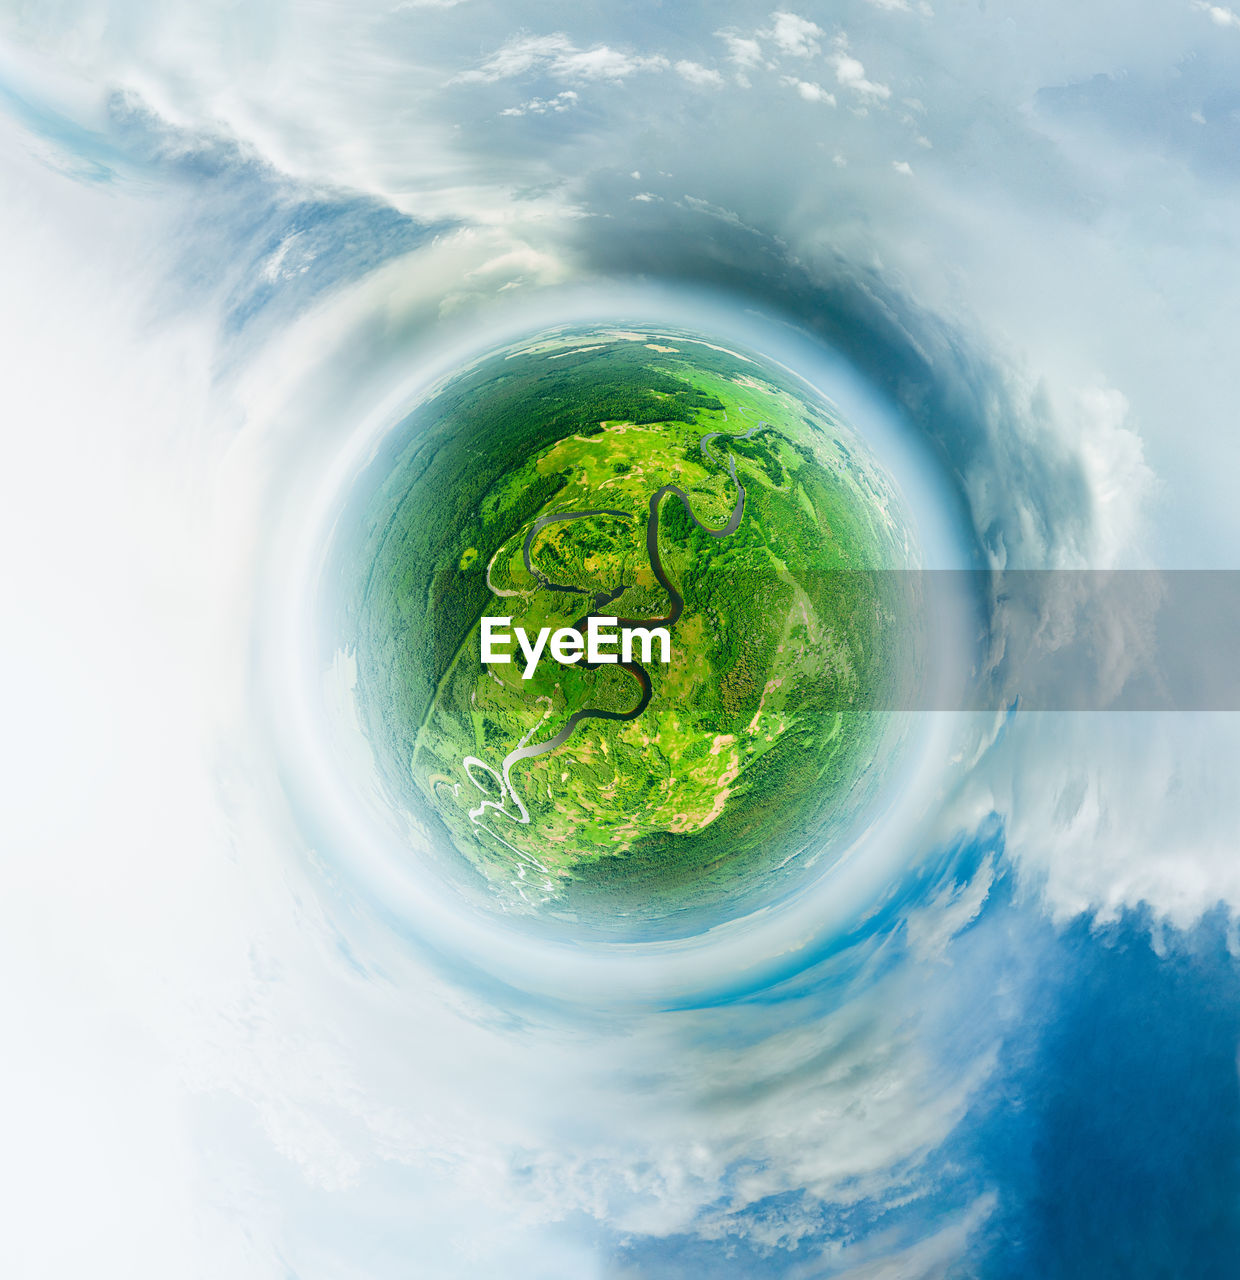 earth, planet earth, cloud, nature, planet, water, wave, environment, ocean, no people, sky, sea, globe - man made object, outdoors, space, circle, digital composite, wind wave, green, environmental issues